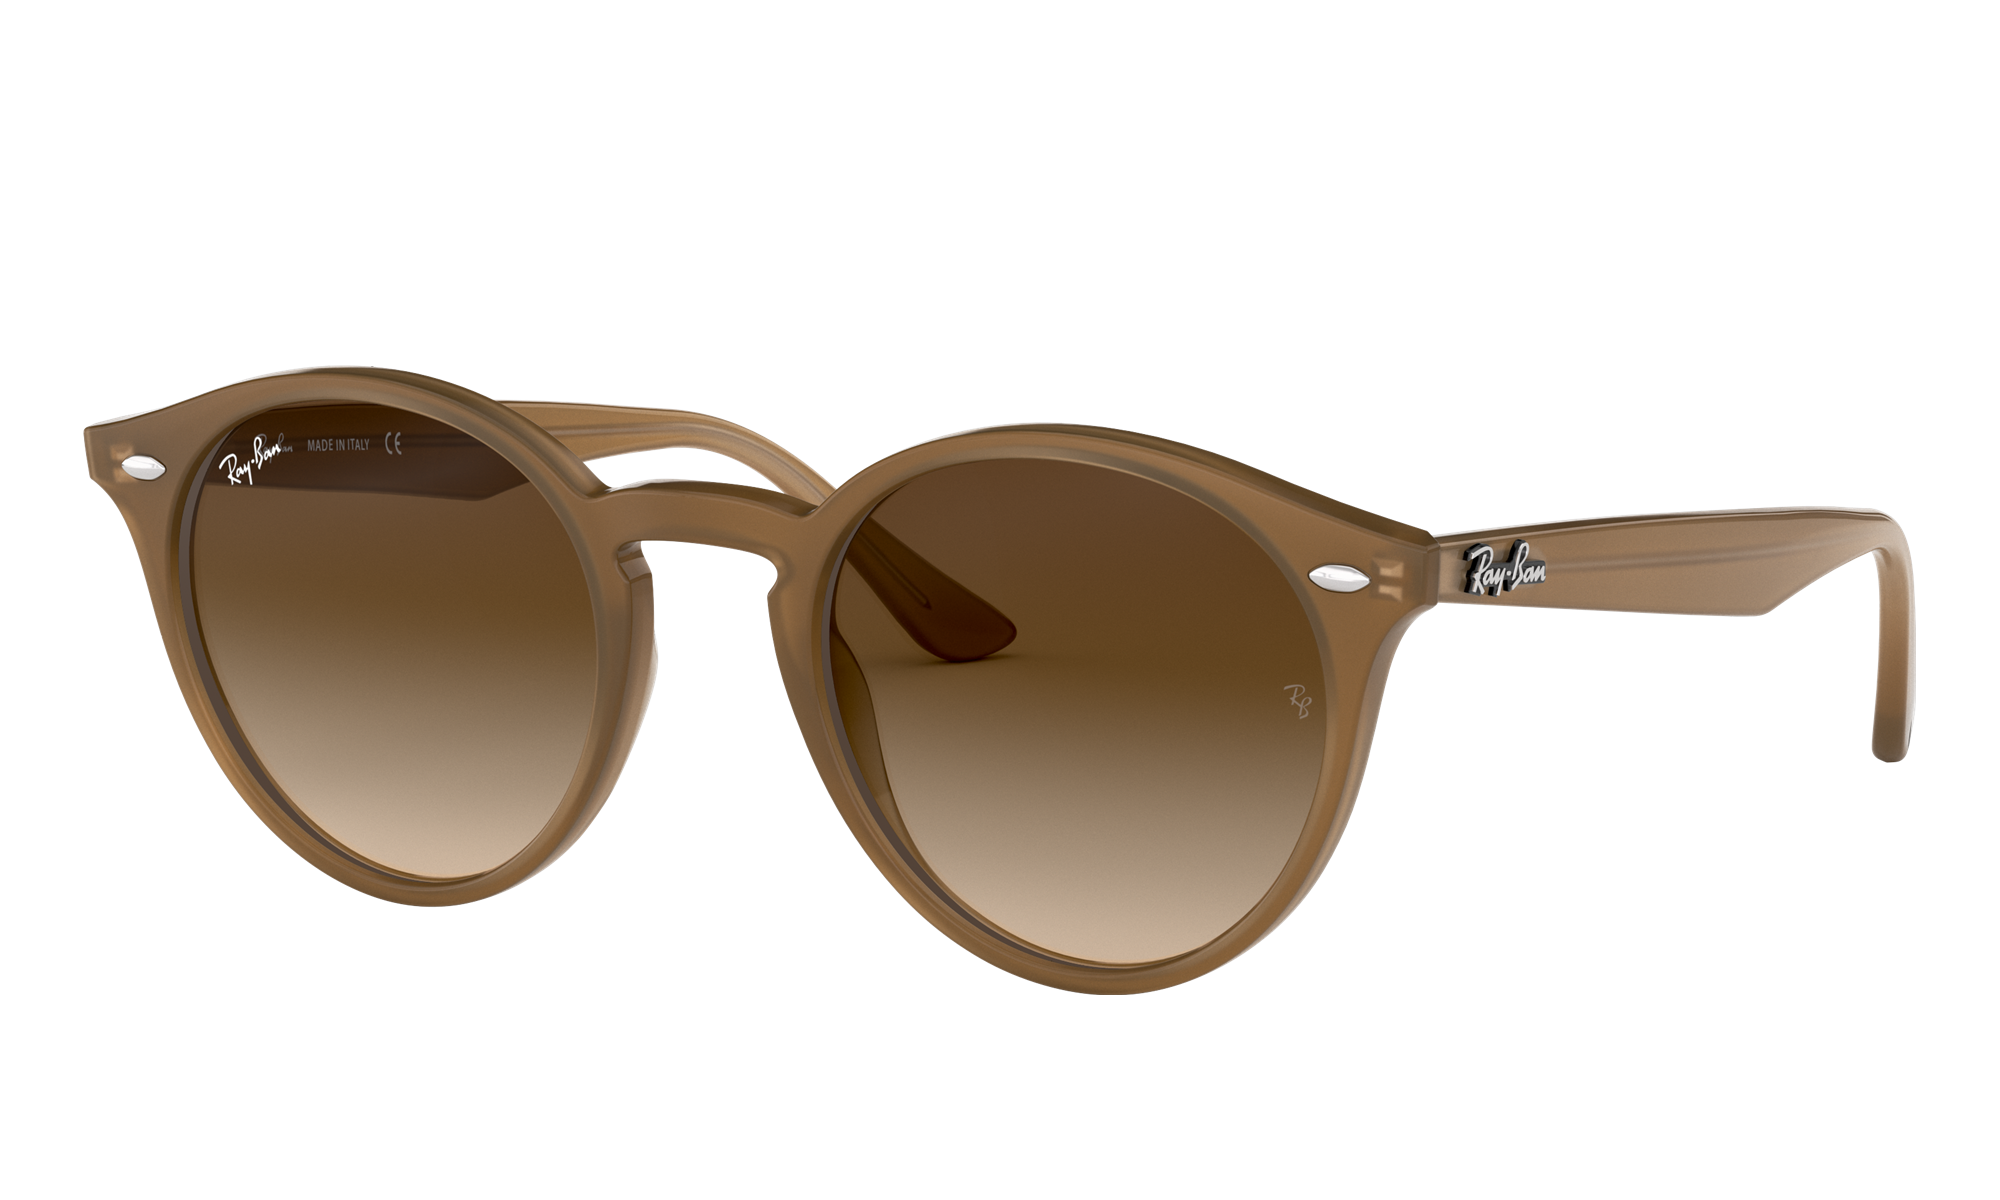 Ray-Ban Unisex Rb2180 Light Brown Size: Standard